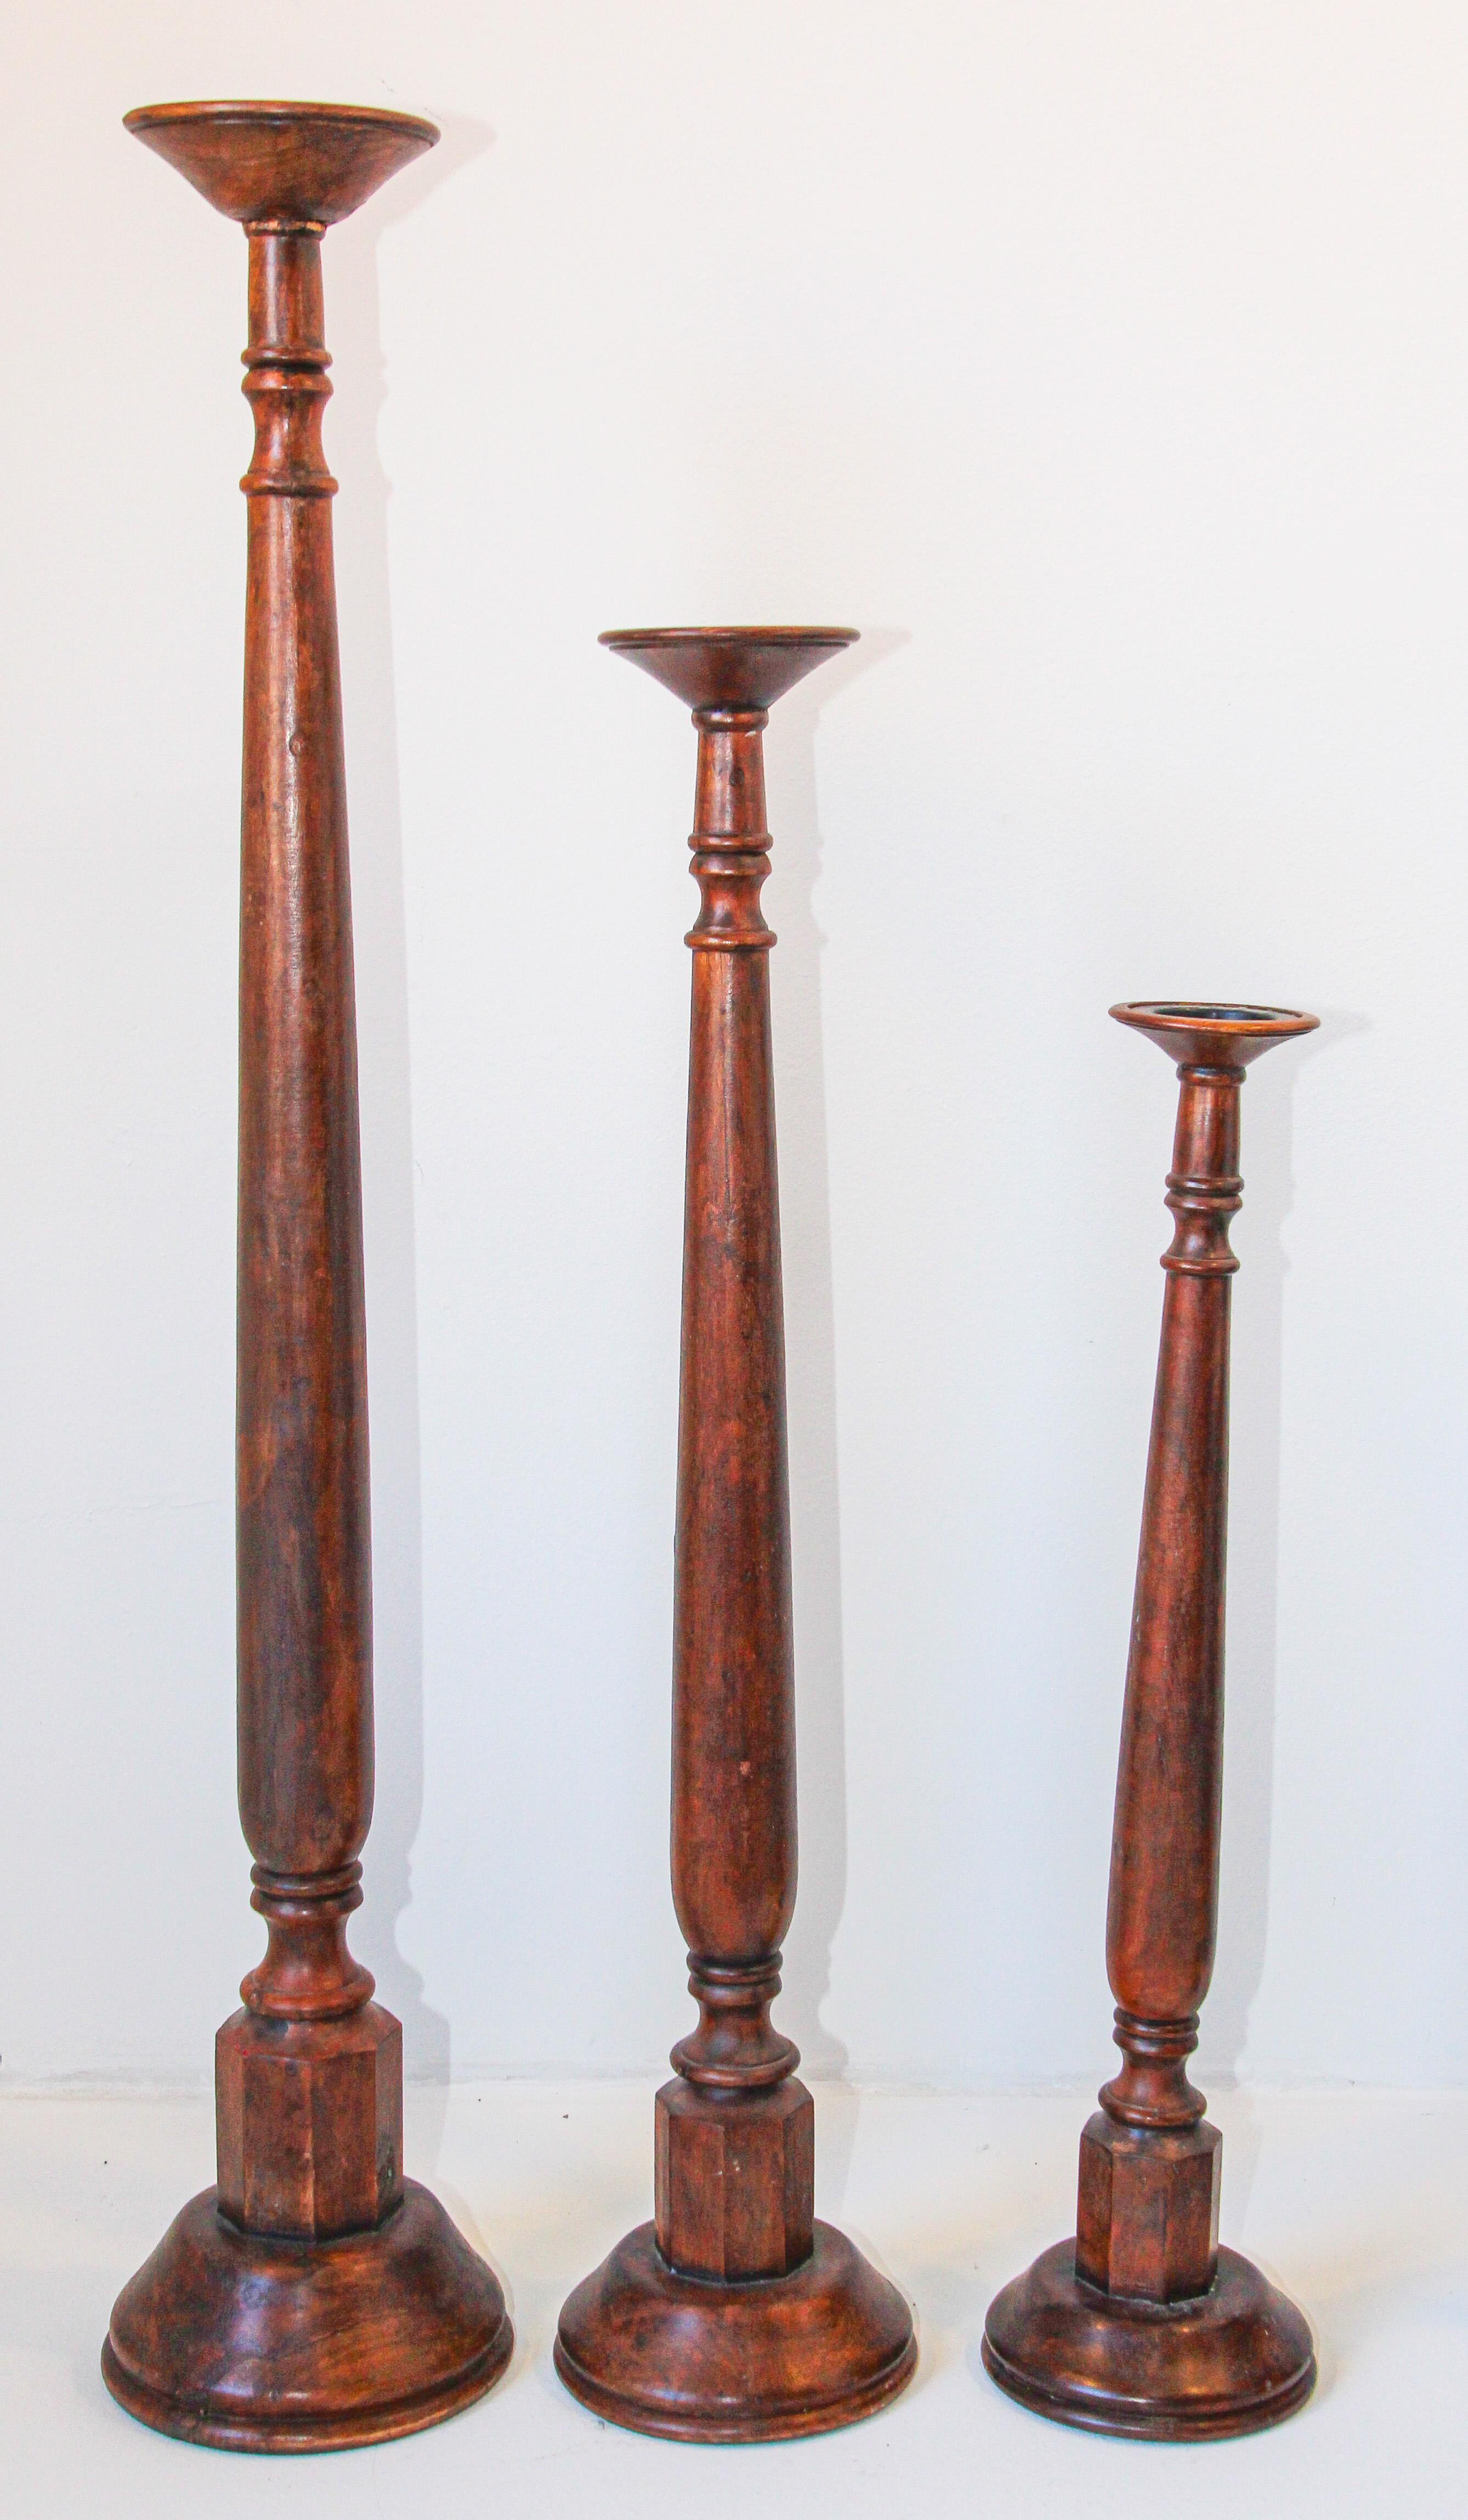 Wooden tall teak pillar candle holder set of three in different sizes.
Elegant sculptural teak turned wood floor rustic Spanish style candlesticks on round bases. 
Elegant rustic turned teak wood pillar candle stand with stunning color and patina